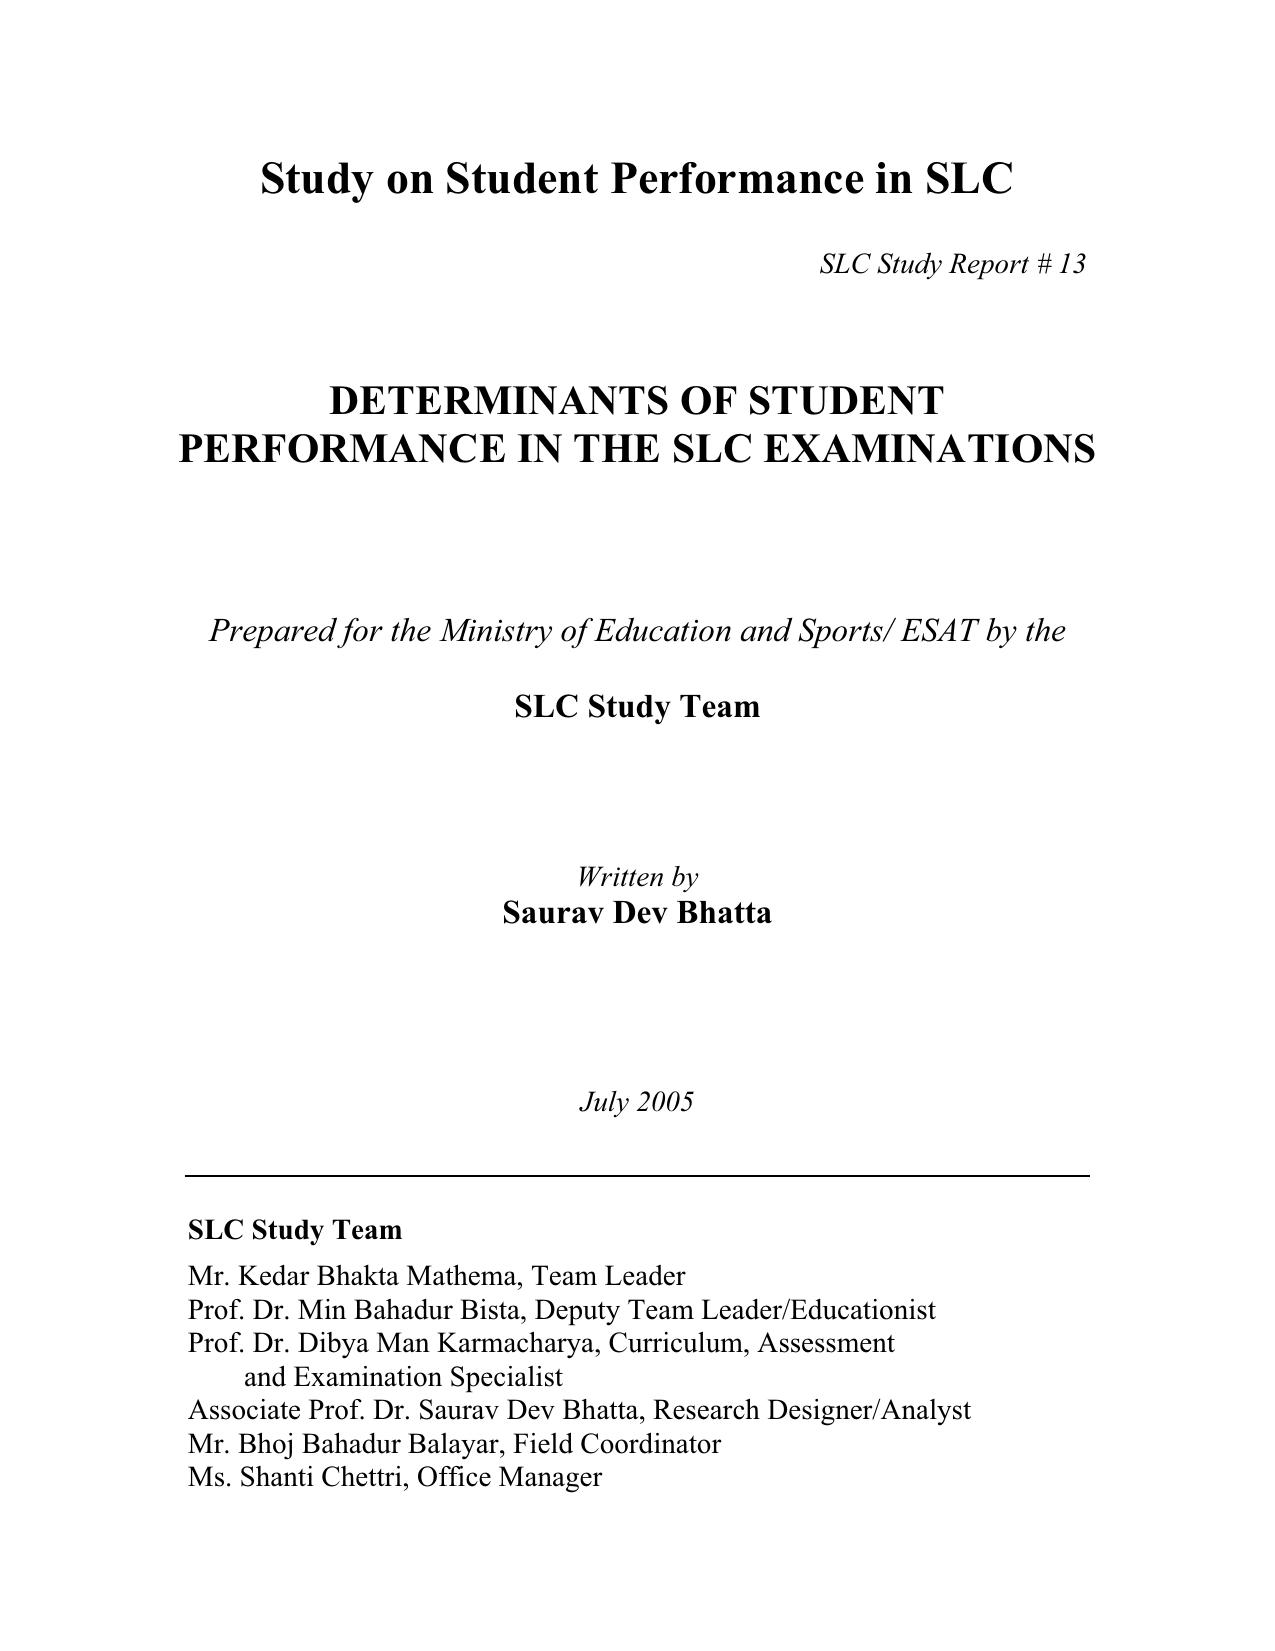 Determinants of Student Performance In SLC Exams(2005)